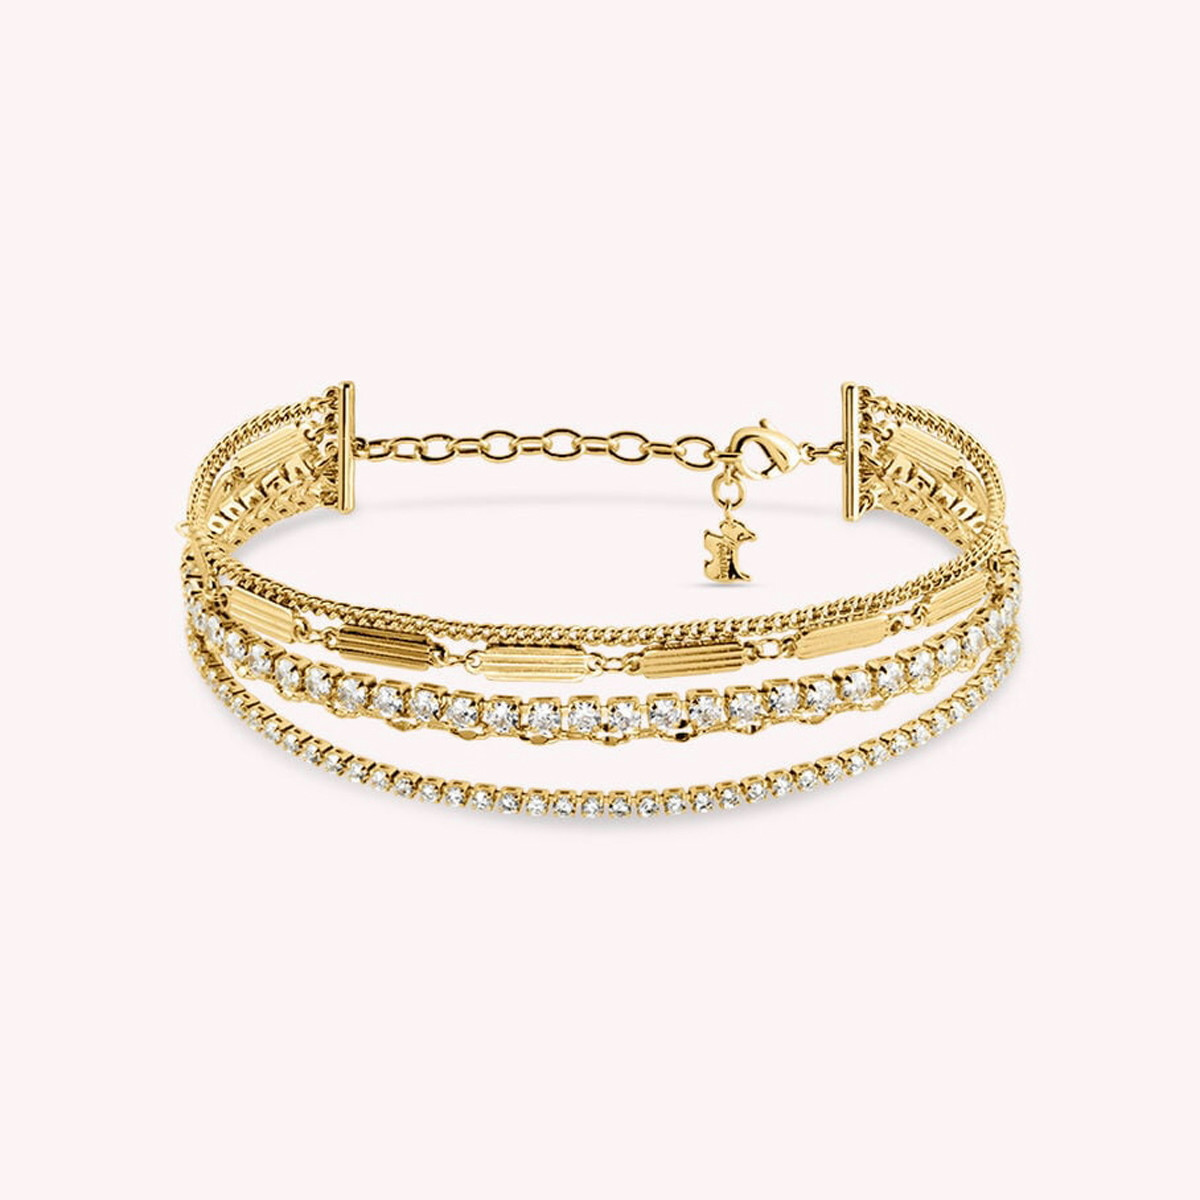 ISIS CRYSTAL / GOLD CHAIN BRACELET